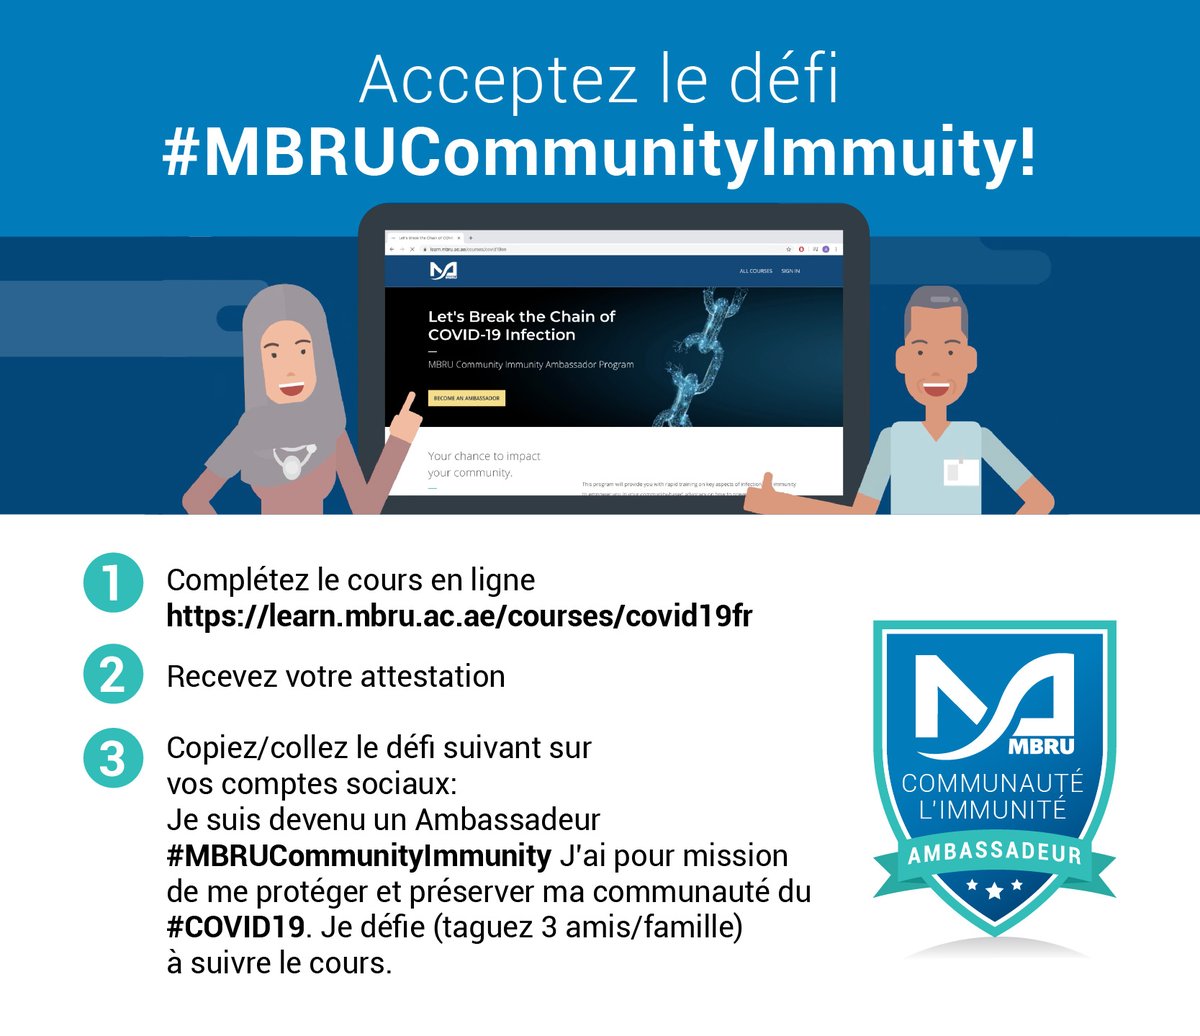 Mbru Salut We Have Great News For All French Speakers Our Mbrucommunityimmunity Ambassador Program Is Now Available In French As Well As English And Arabic Join Now T Co Yzea0ilrri Mbru T Co En4c6xieei